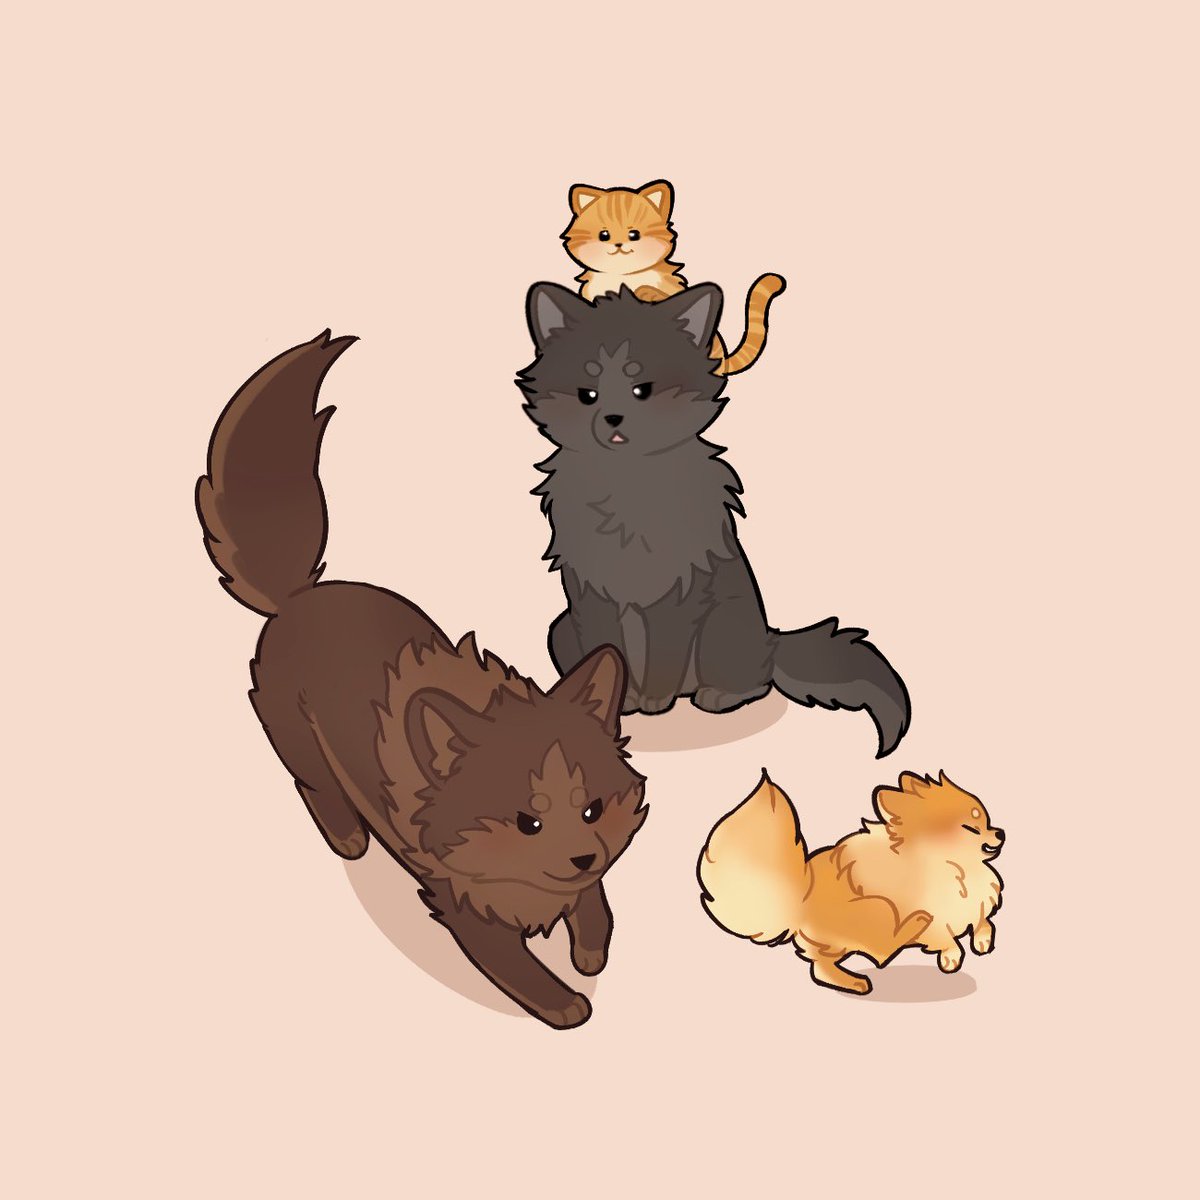 It's been almost a year without Daybreak, so I commissioned @minjipup for this beautiful furry squad 🫶 while we patiently wait for @adlerklasse 🐺🐺🐶😸

#Loonathefanart #LOOSSEMBLE 
#dreamcatcherfanart #dreamcatcher
#GeorgeRRMartin